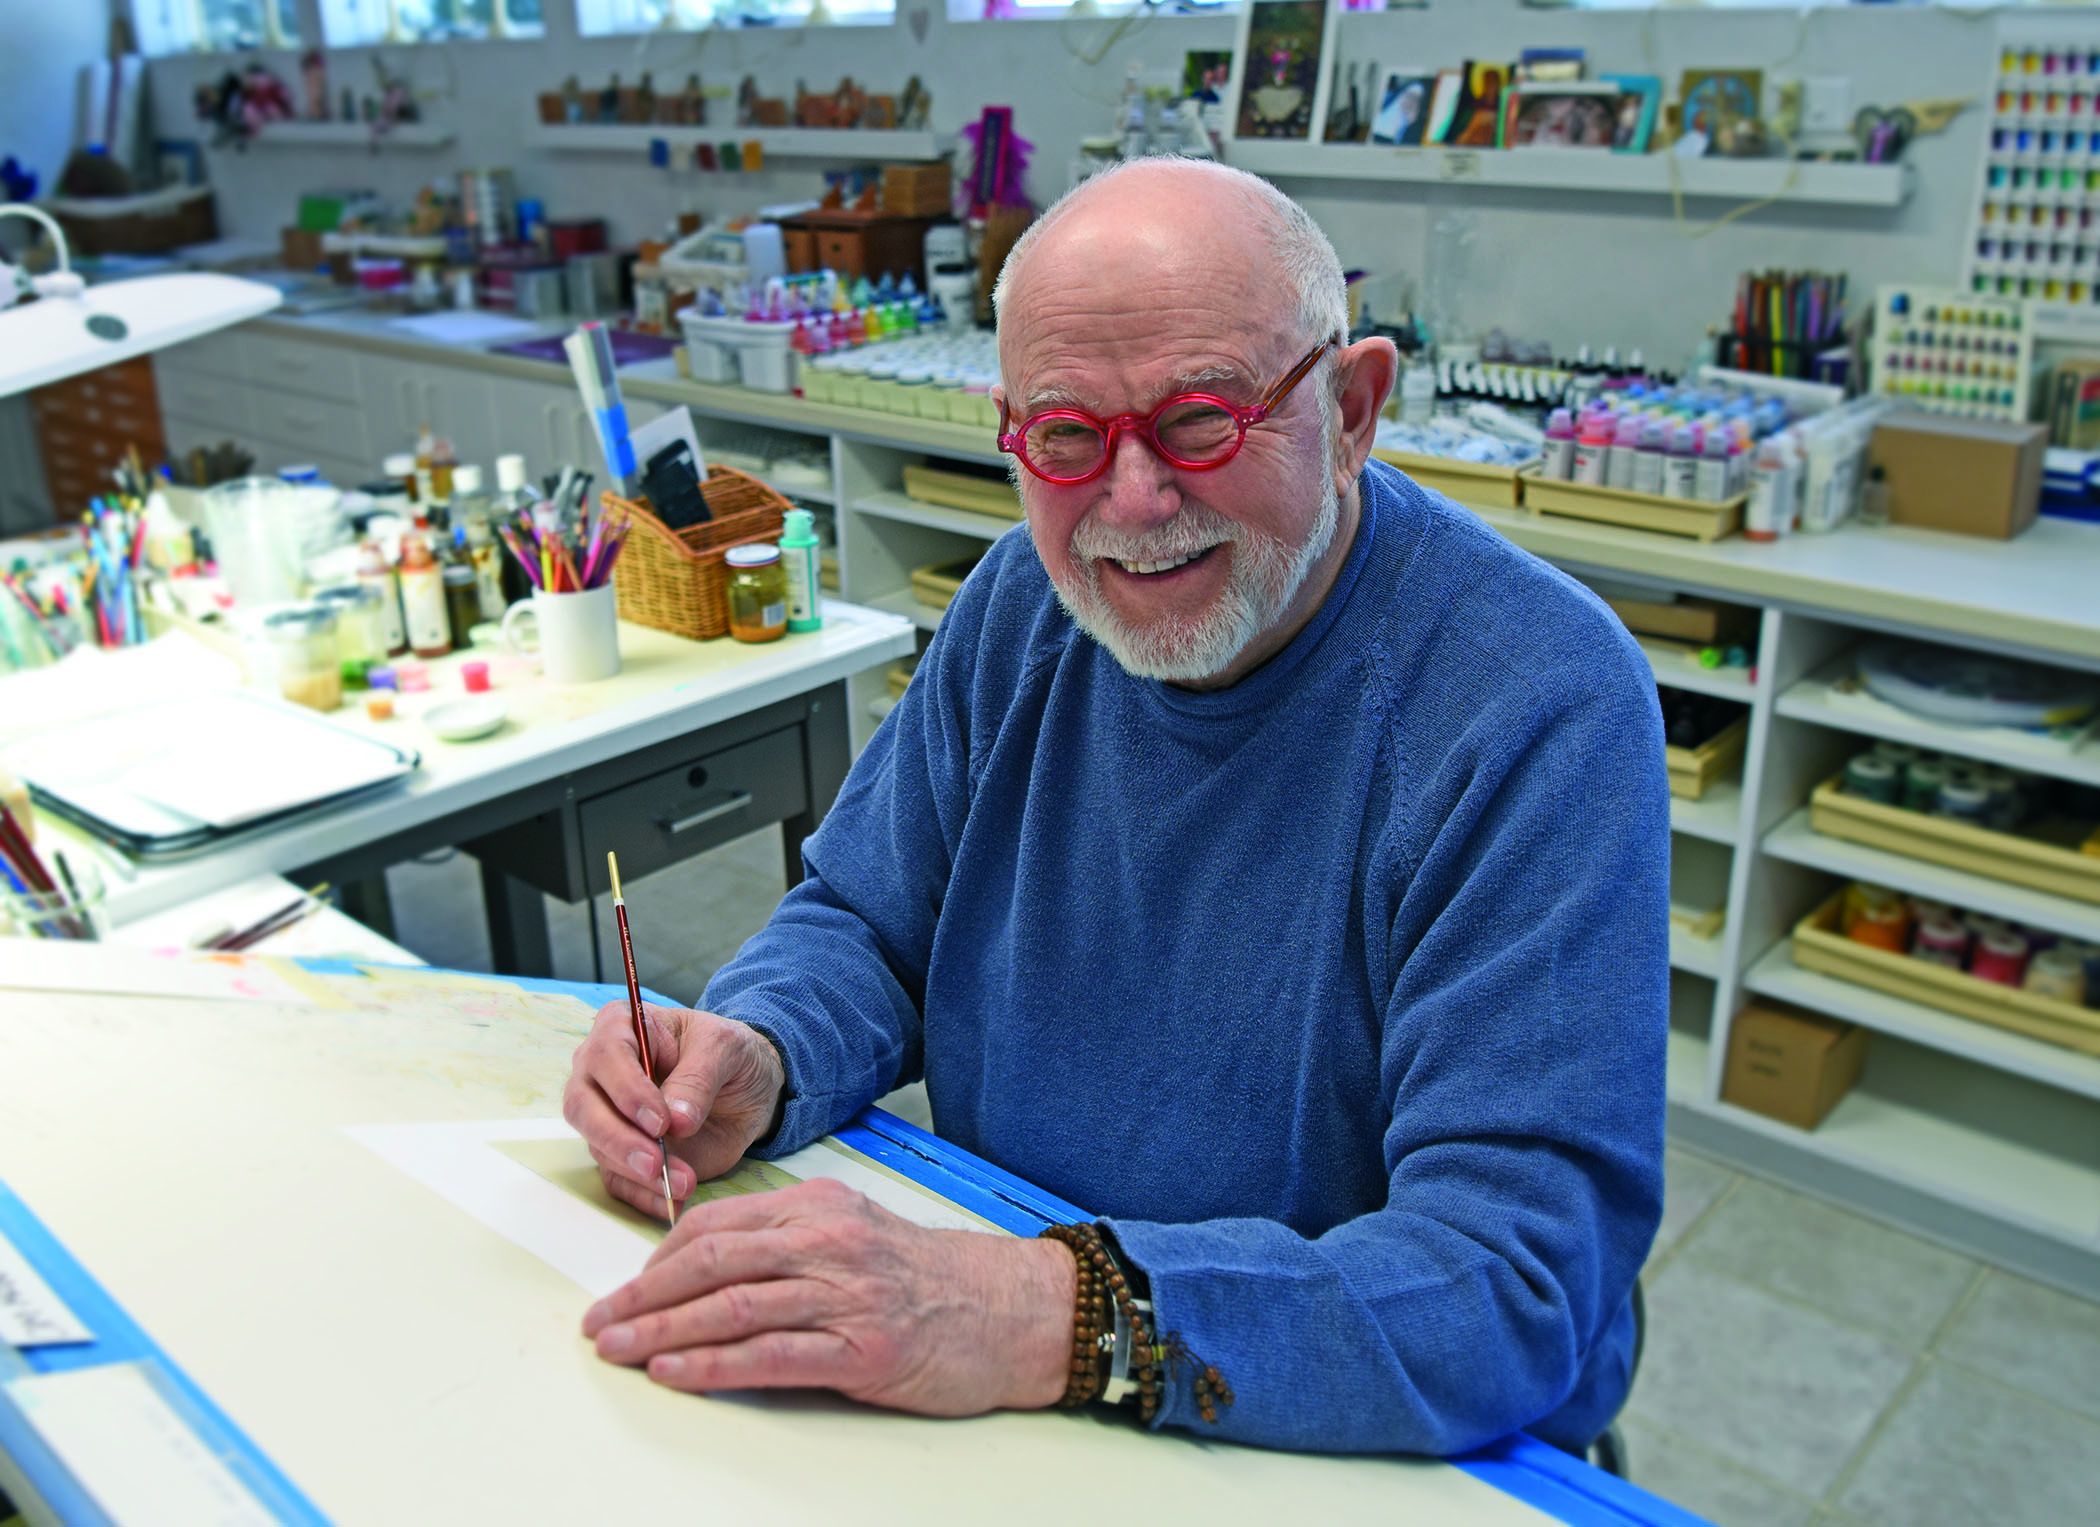 Books for Kids: Posthumous Tomie dePaola stories a gift to fans